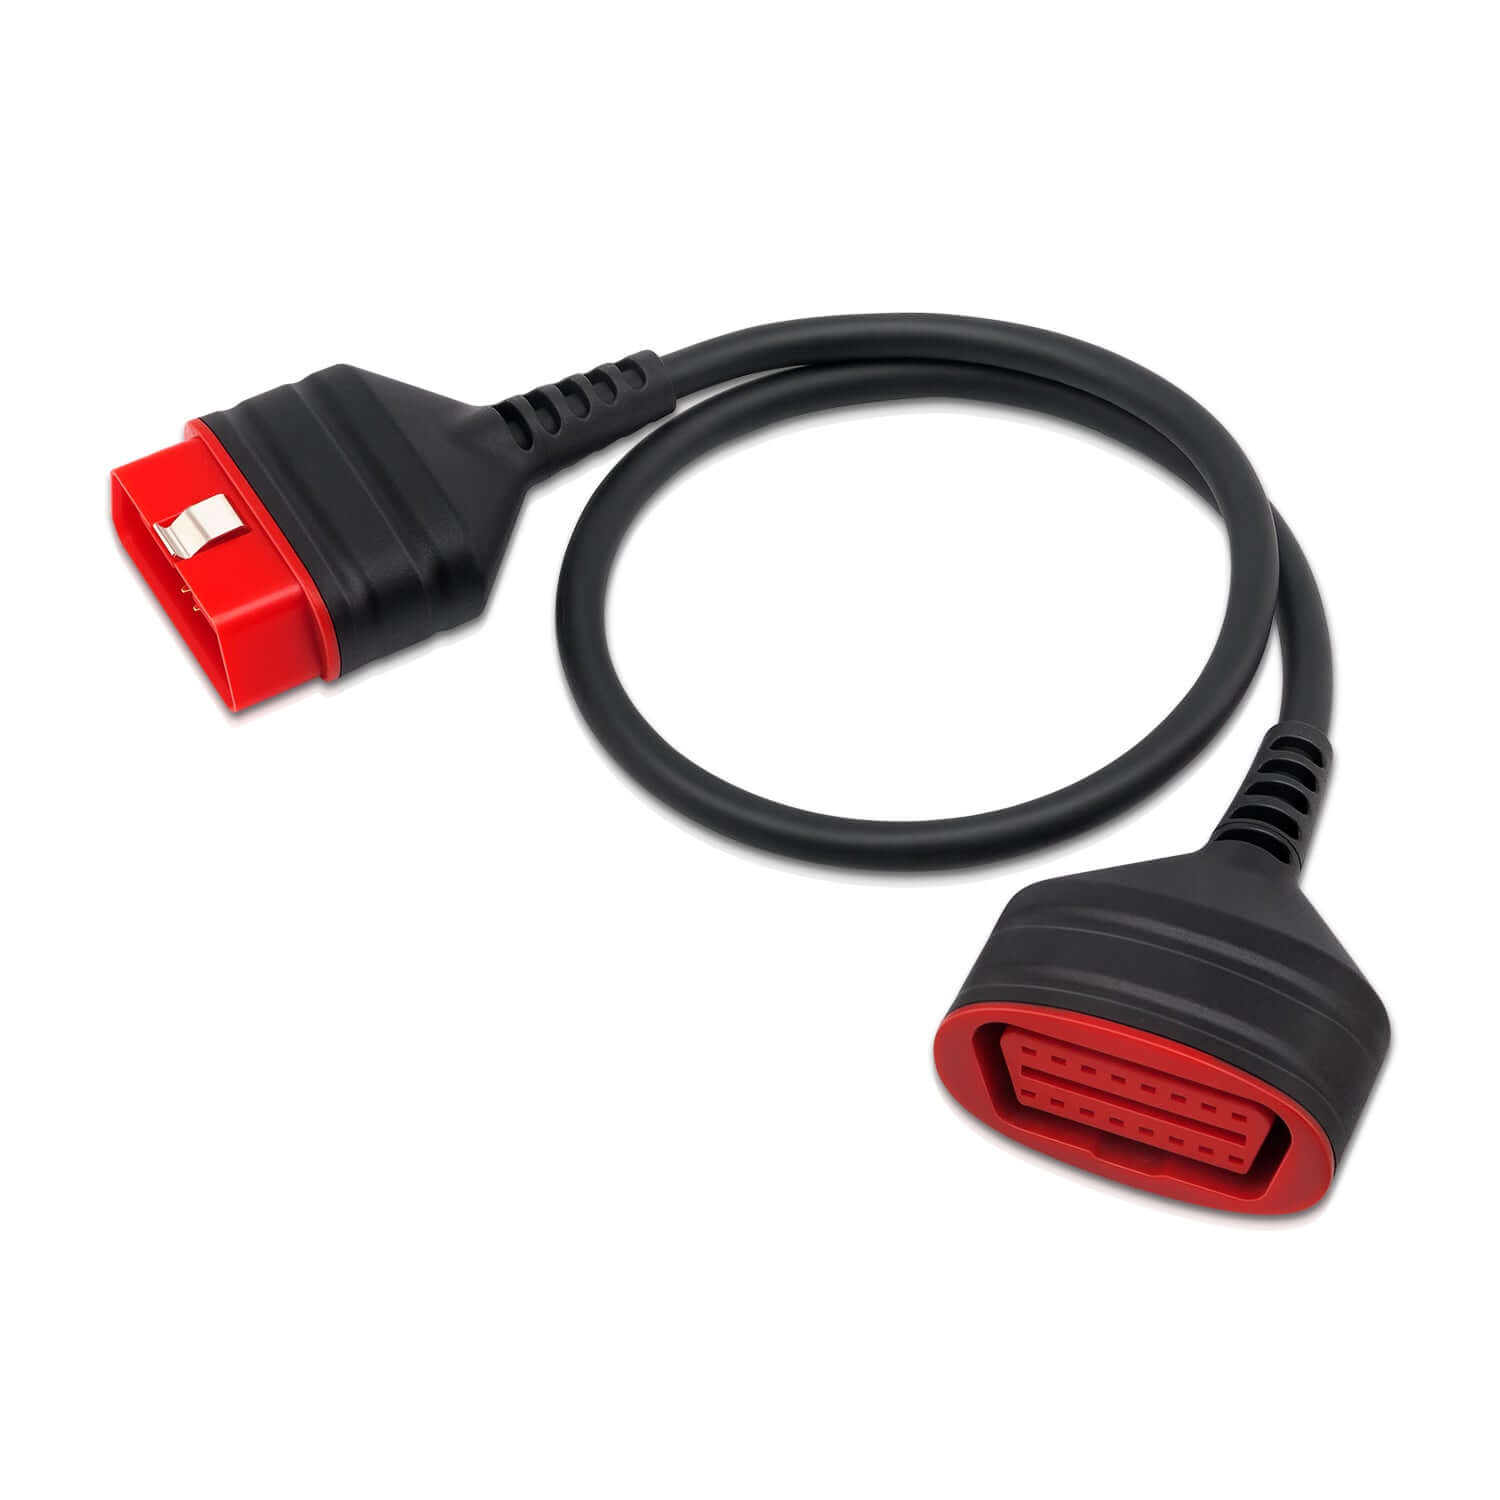 THINKCAR 16 Pin OBD2 Extension Cable for Thinkdiag